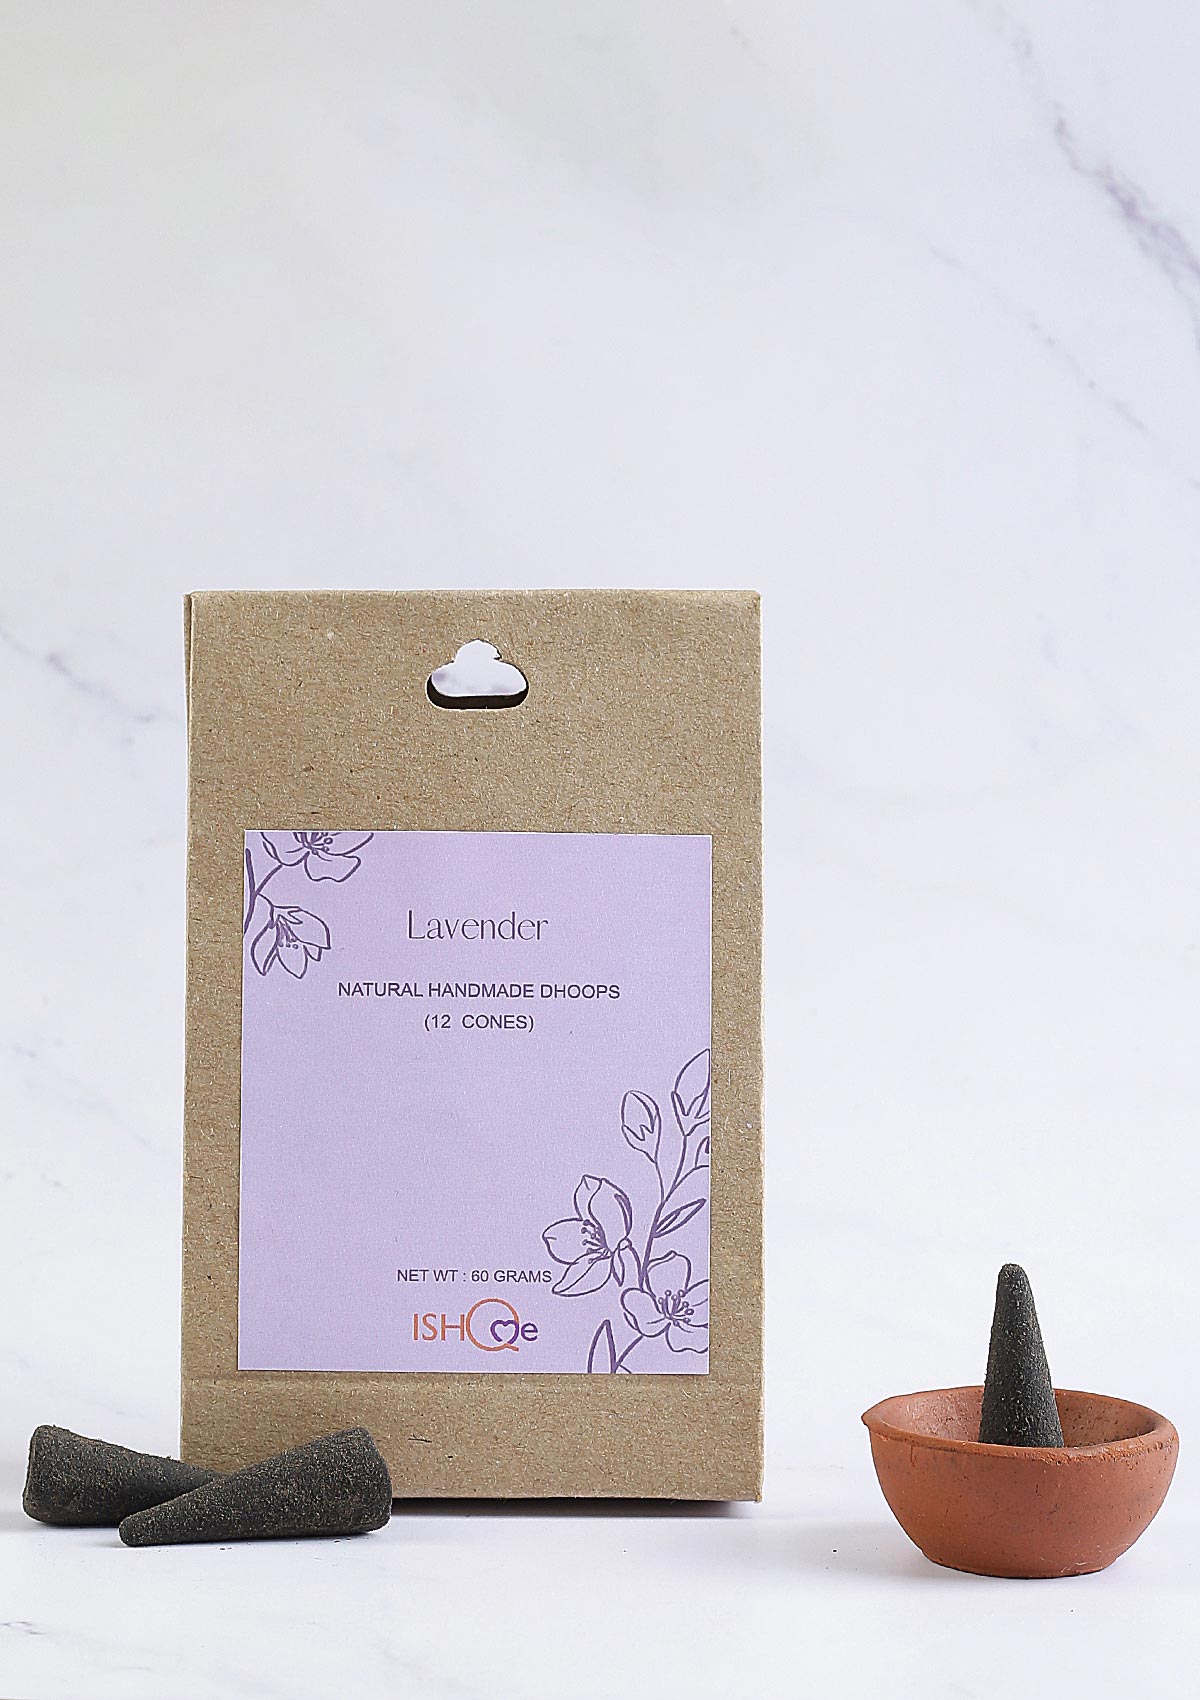 Lavender & Parijat Dhoop Cones with IshqMe's Turquoise sea Stand